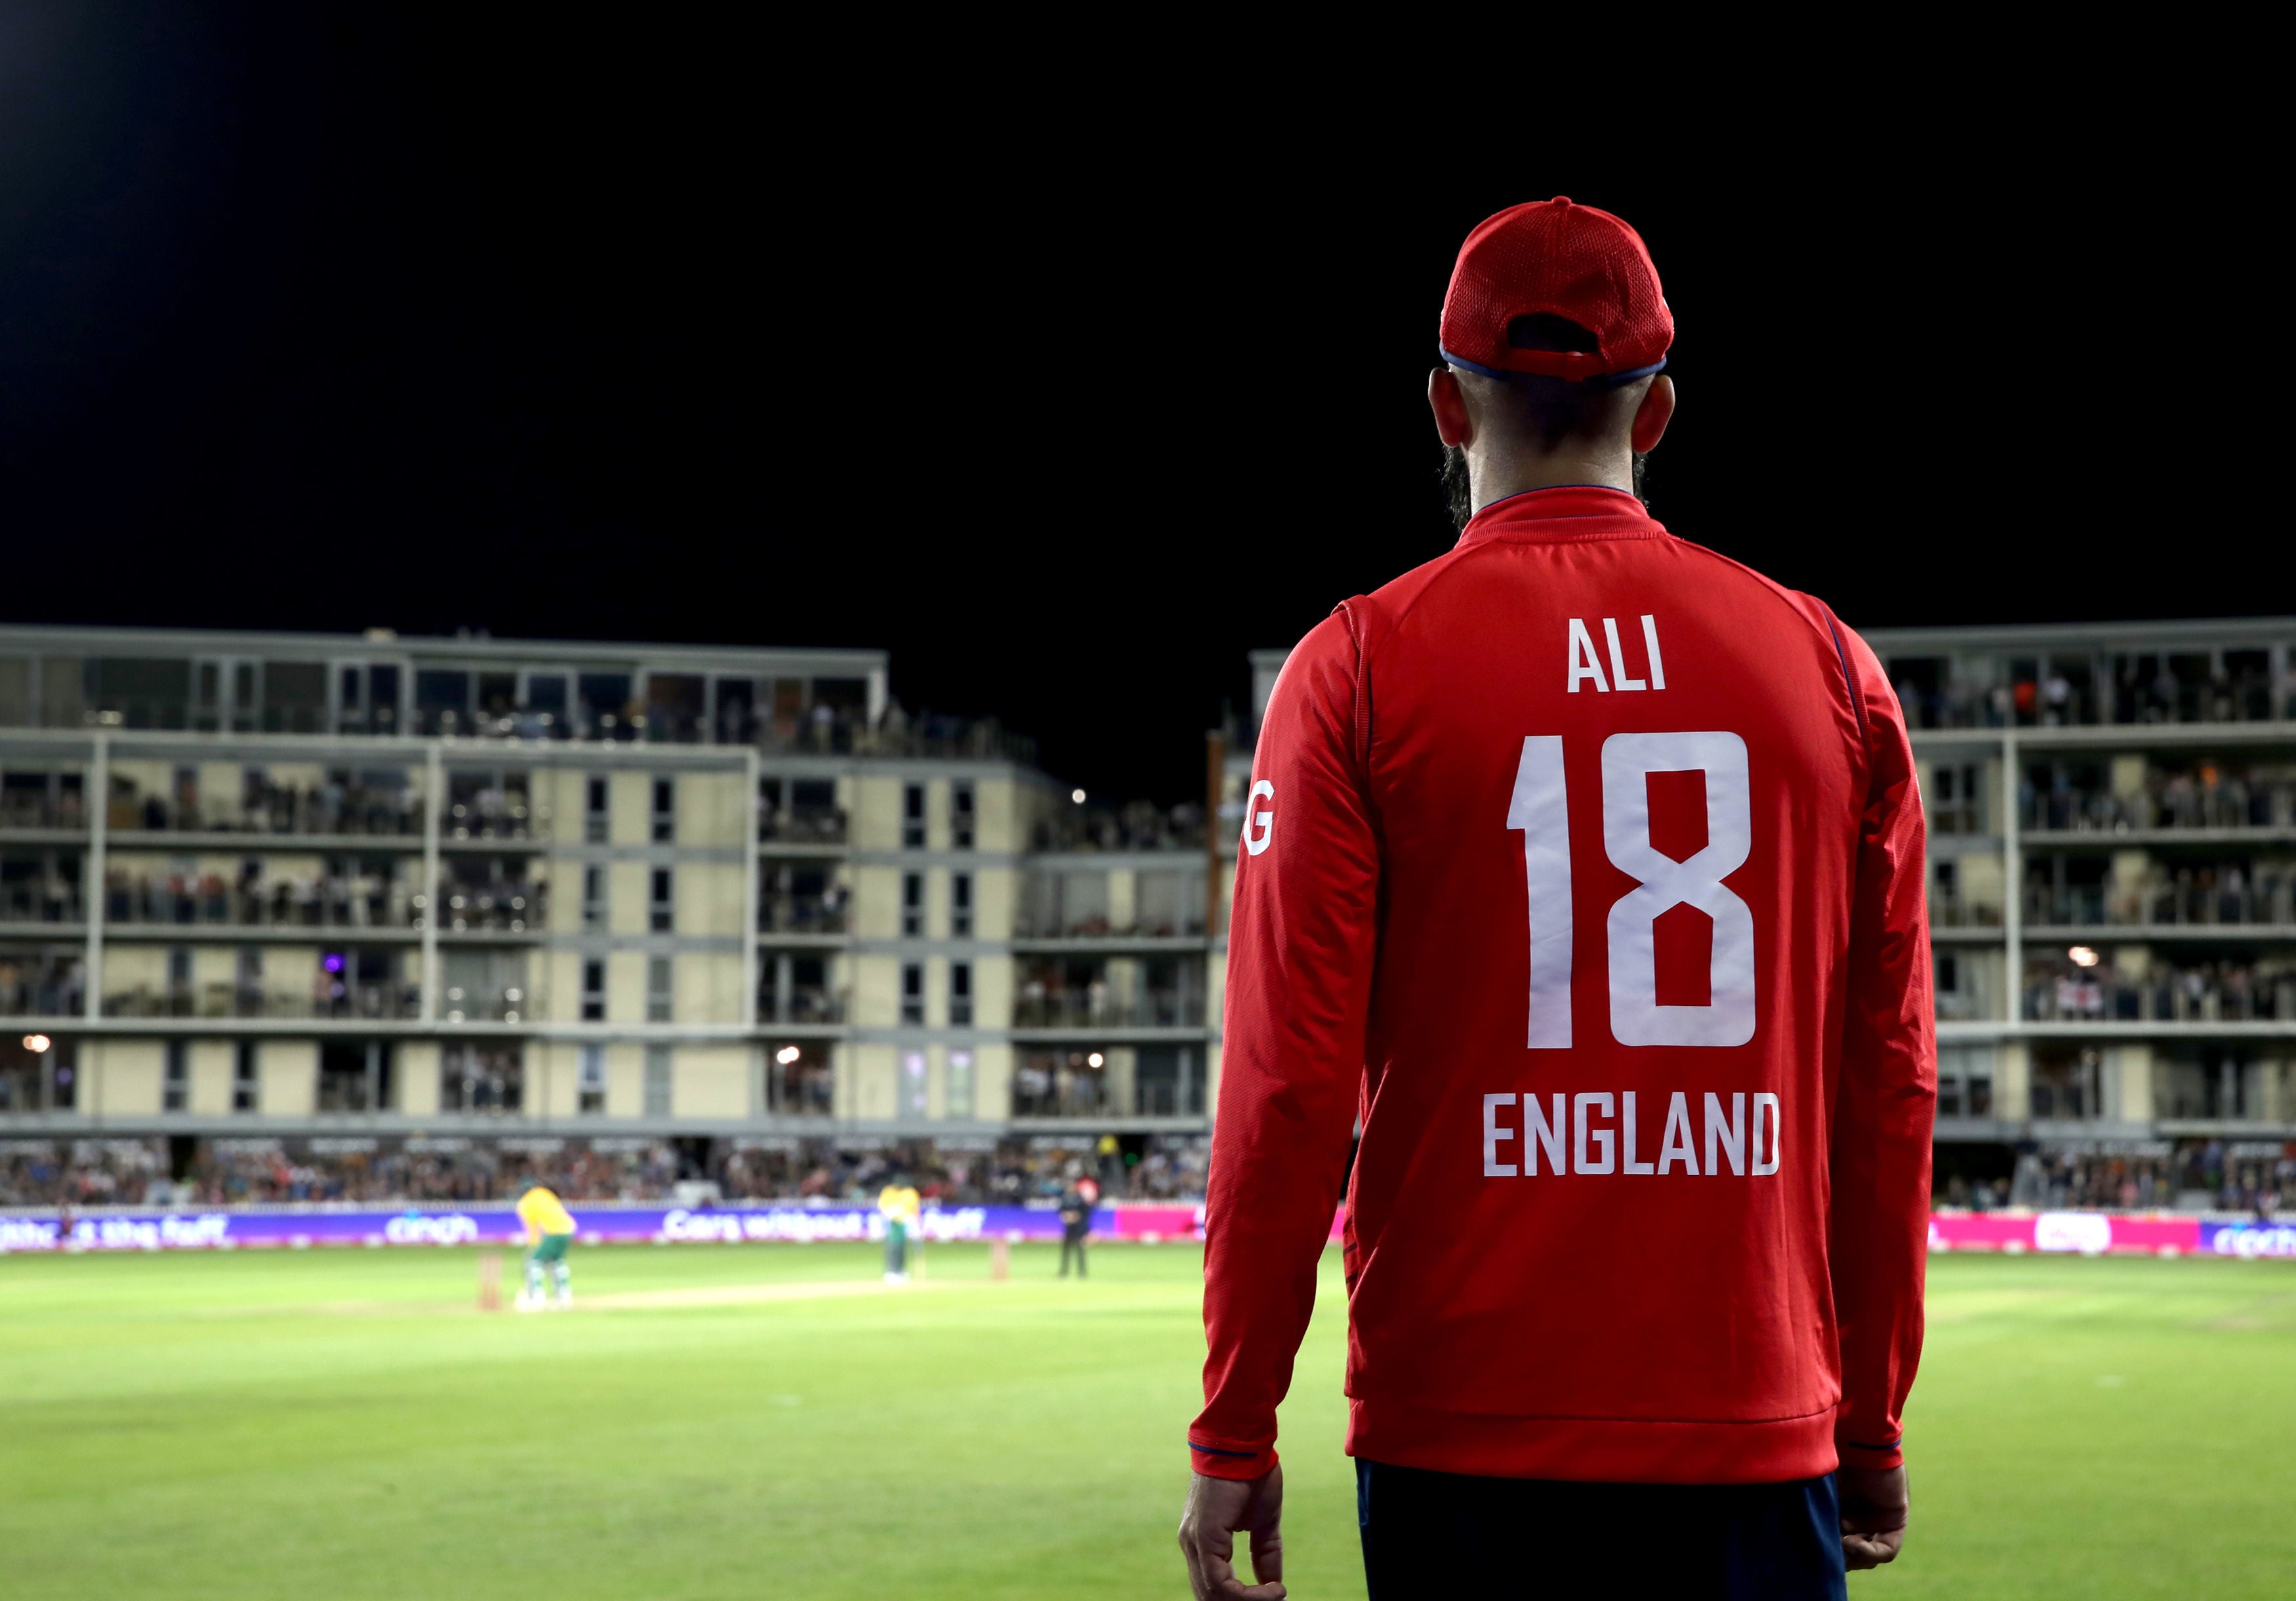 There’s no better time, then, for England to find their own groove at last